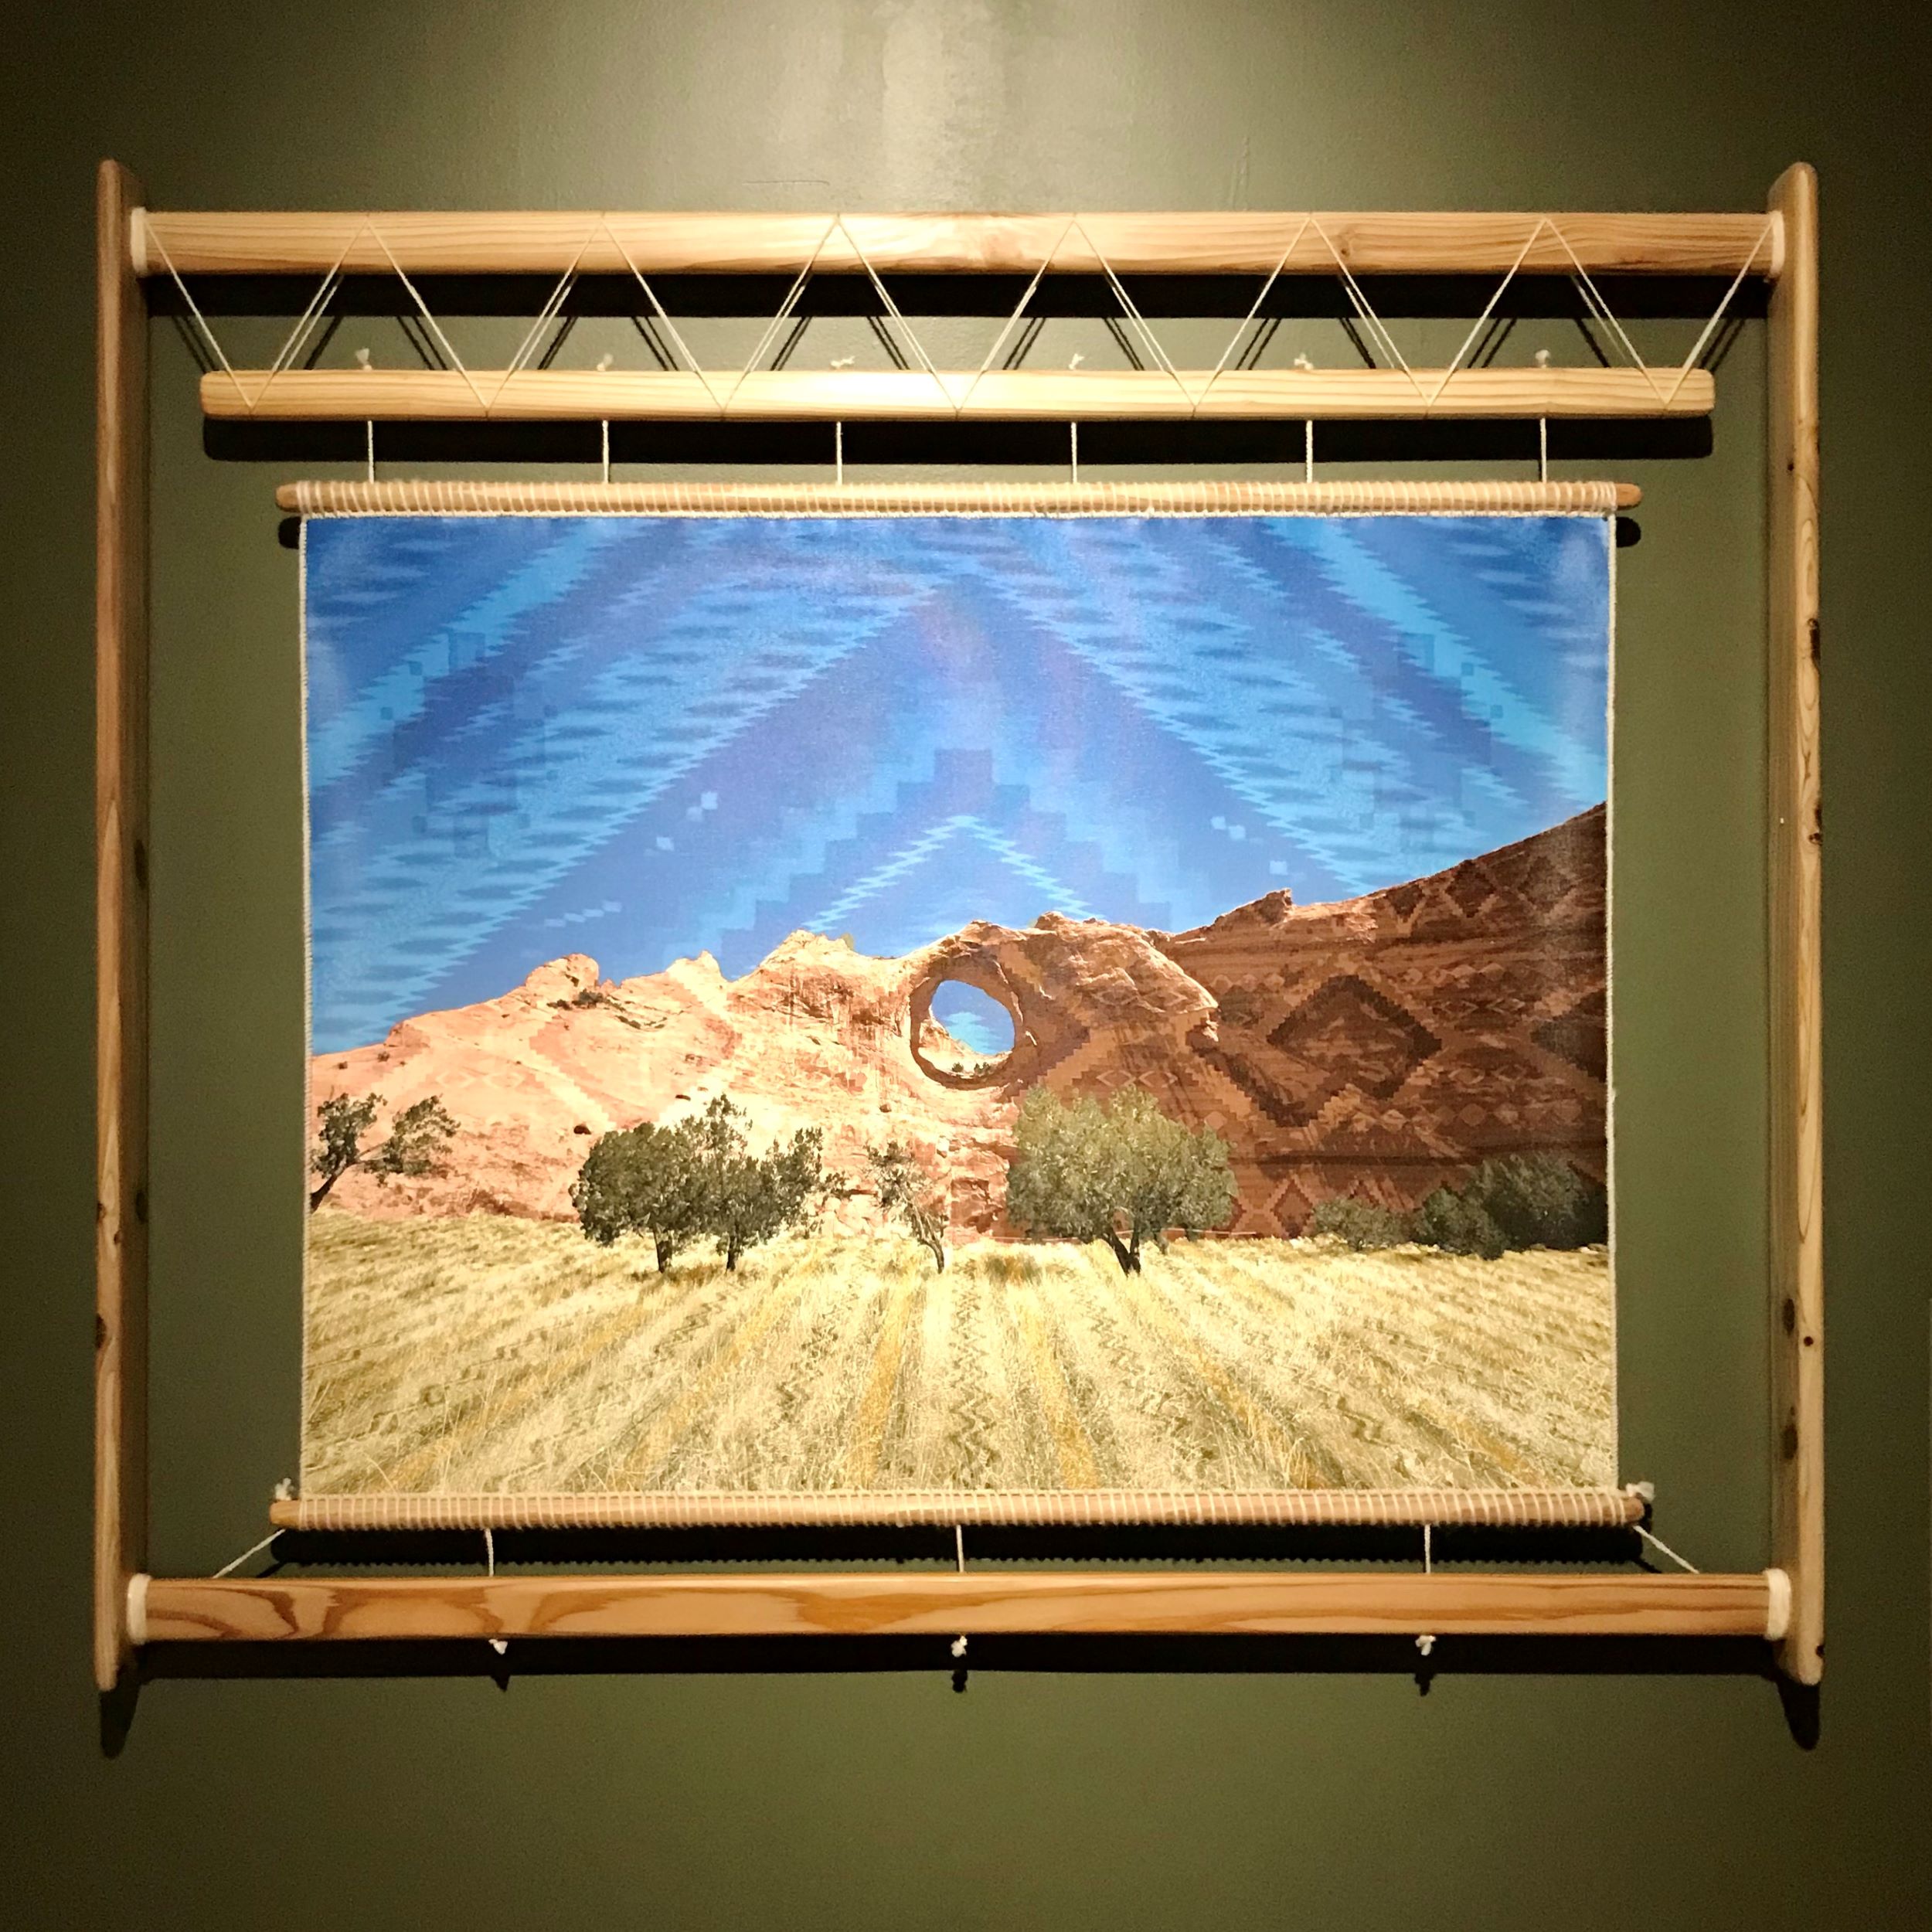 Weaving depicting a desert landscape with geometric patterns in the blue sky, framed in a loom